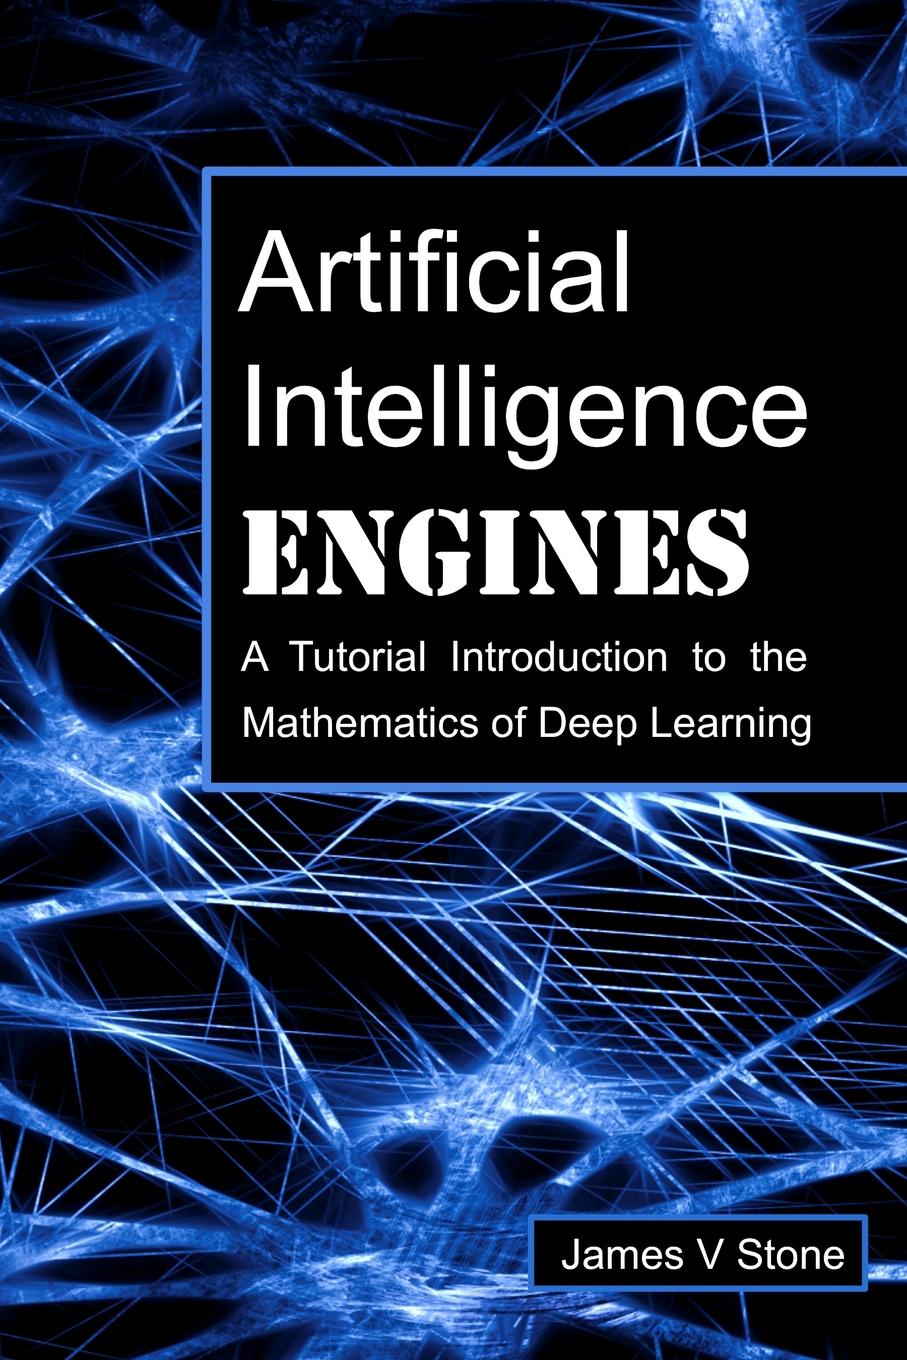 Artificial Intelligence Engines. A Tutorial Introduction to the Mathematics of Deep Learning